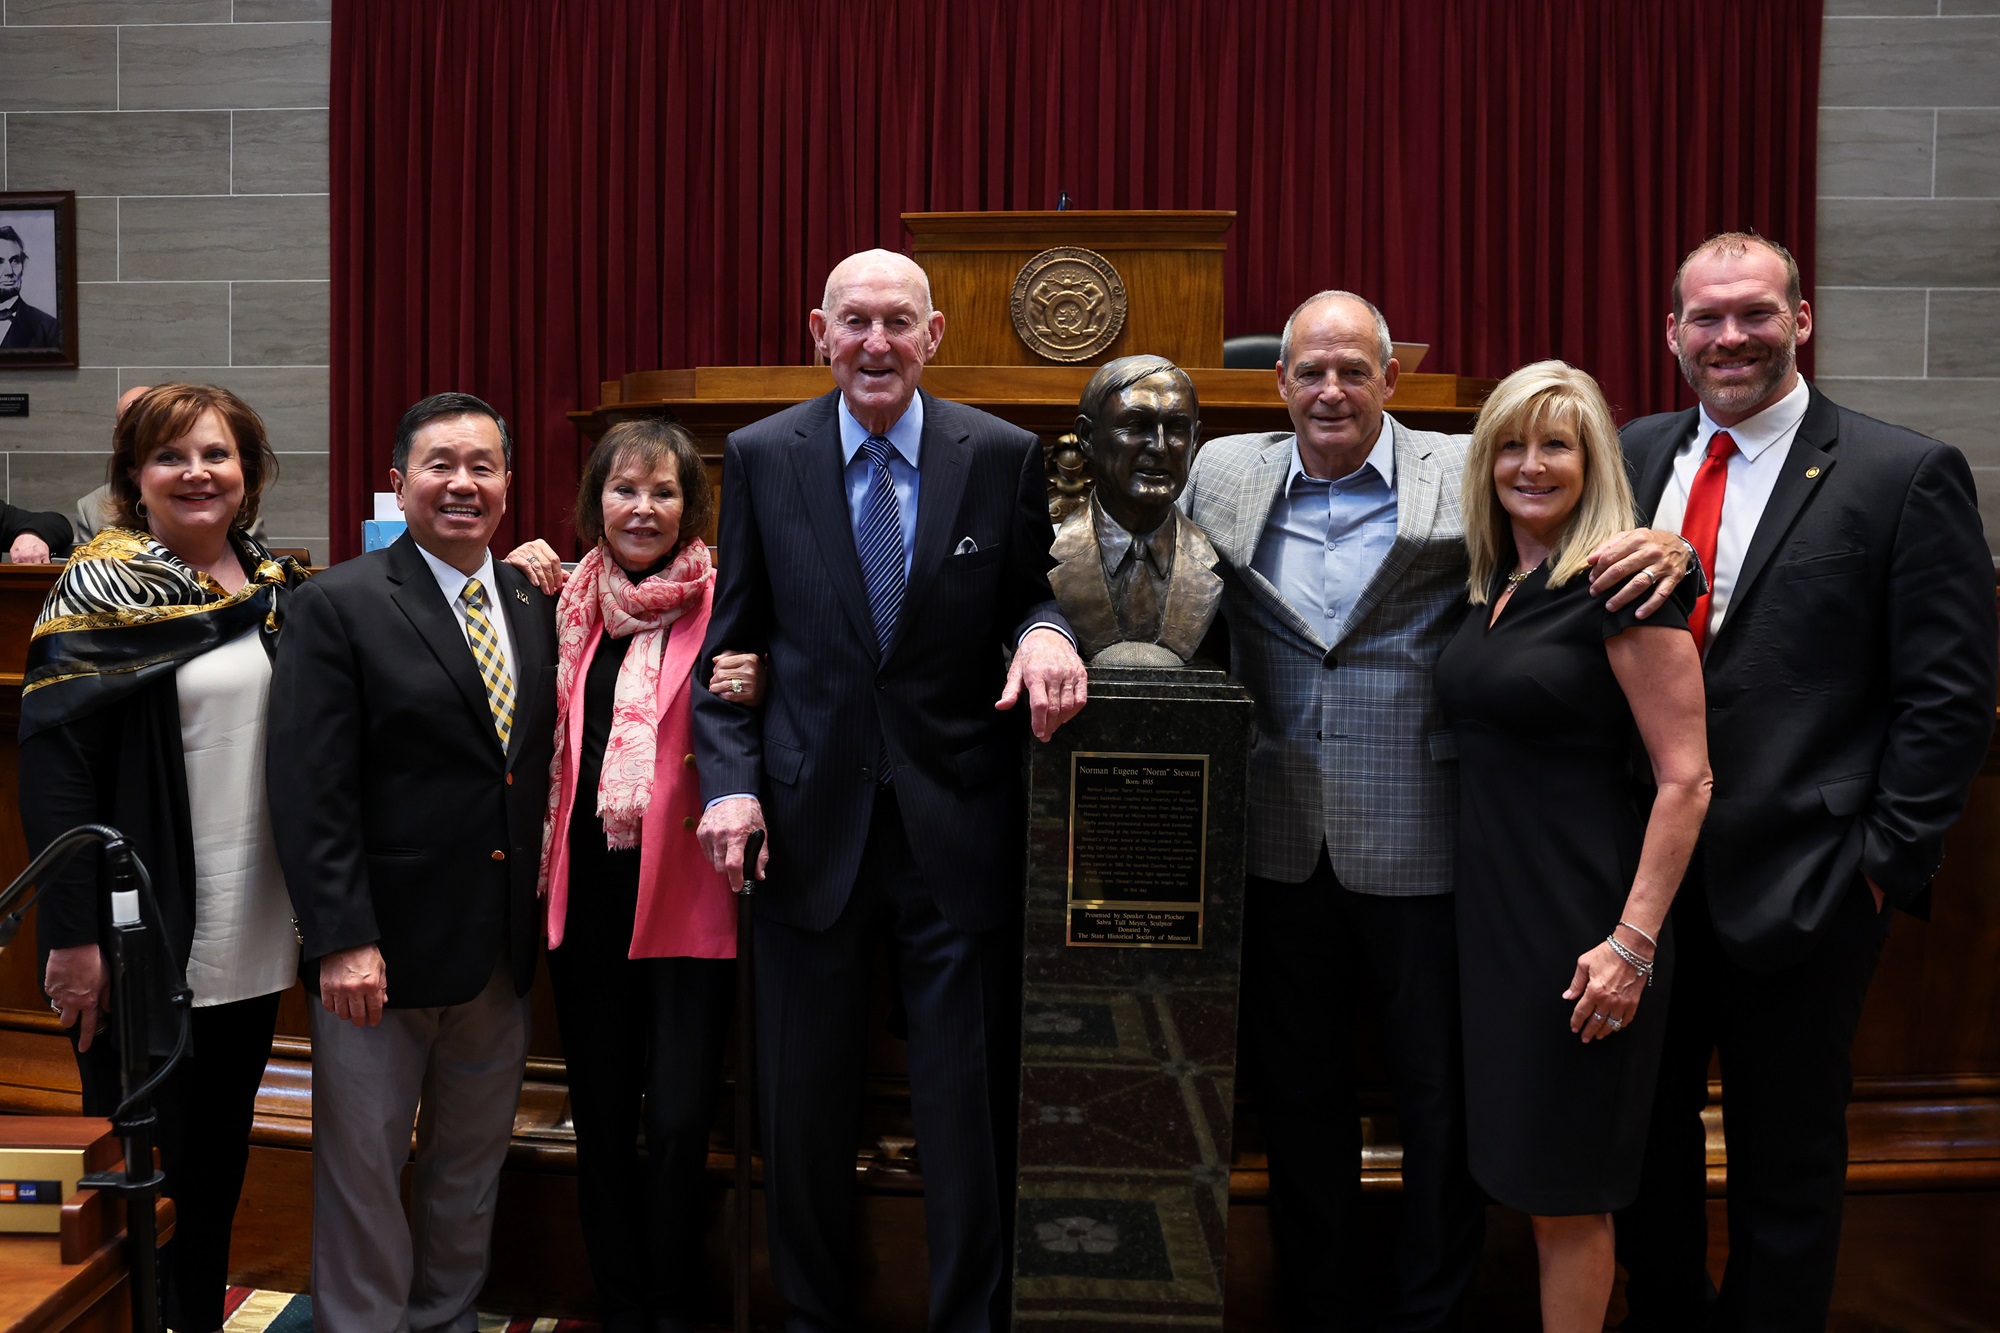 Norm Stewart and, from left, Board of Curators Chair Robin Wenneker, President Mun Choi, Virginia Stewart, Gary Pinkel, Missy Pinkel and Rep. Kurtis Gregory.